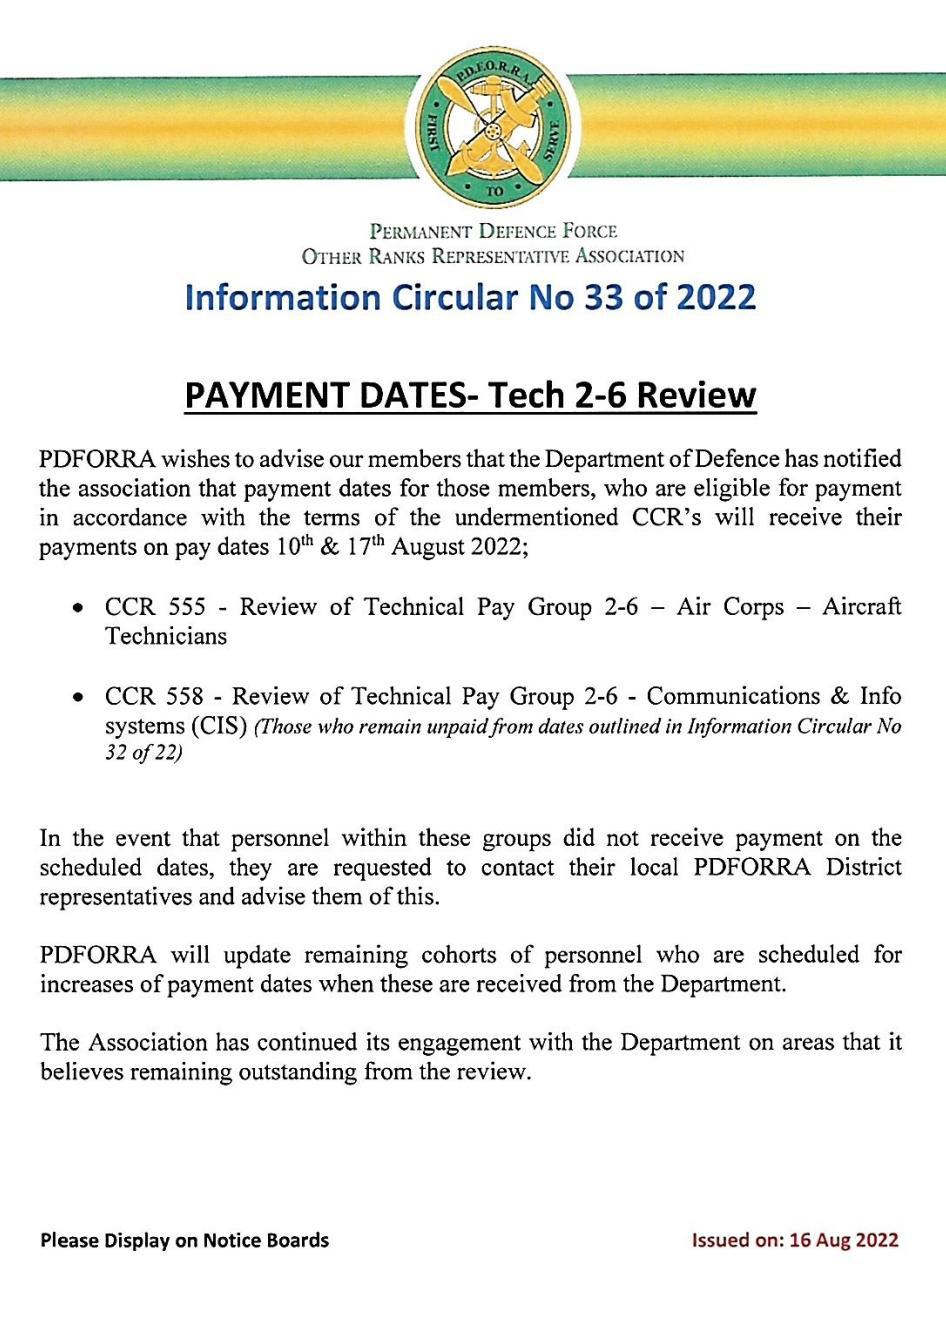 Information Circular No 33 of 22 - Payment Dates Tech 2 to 6 Review